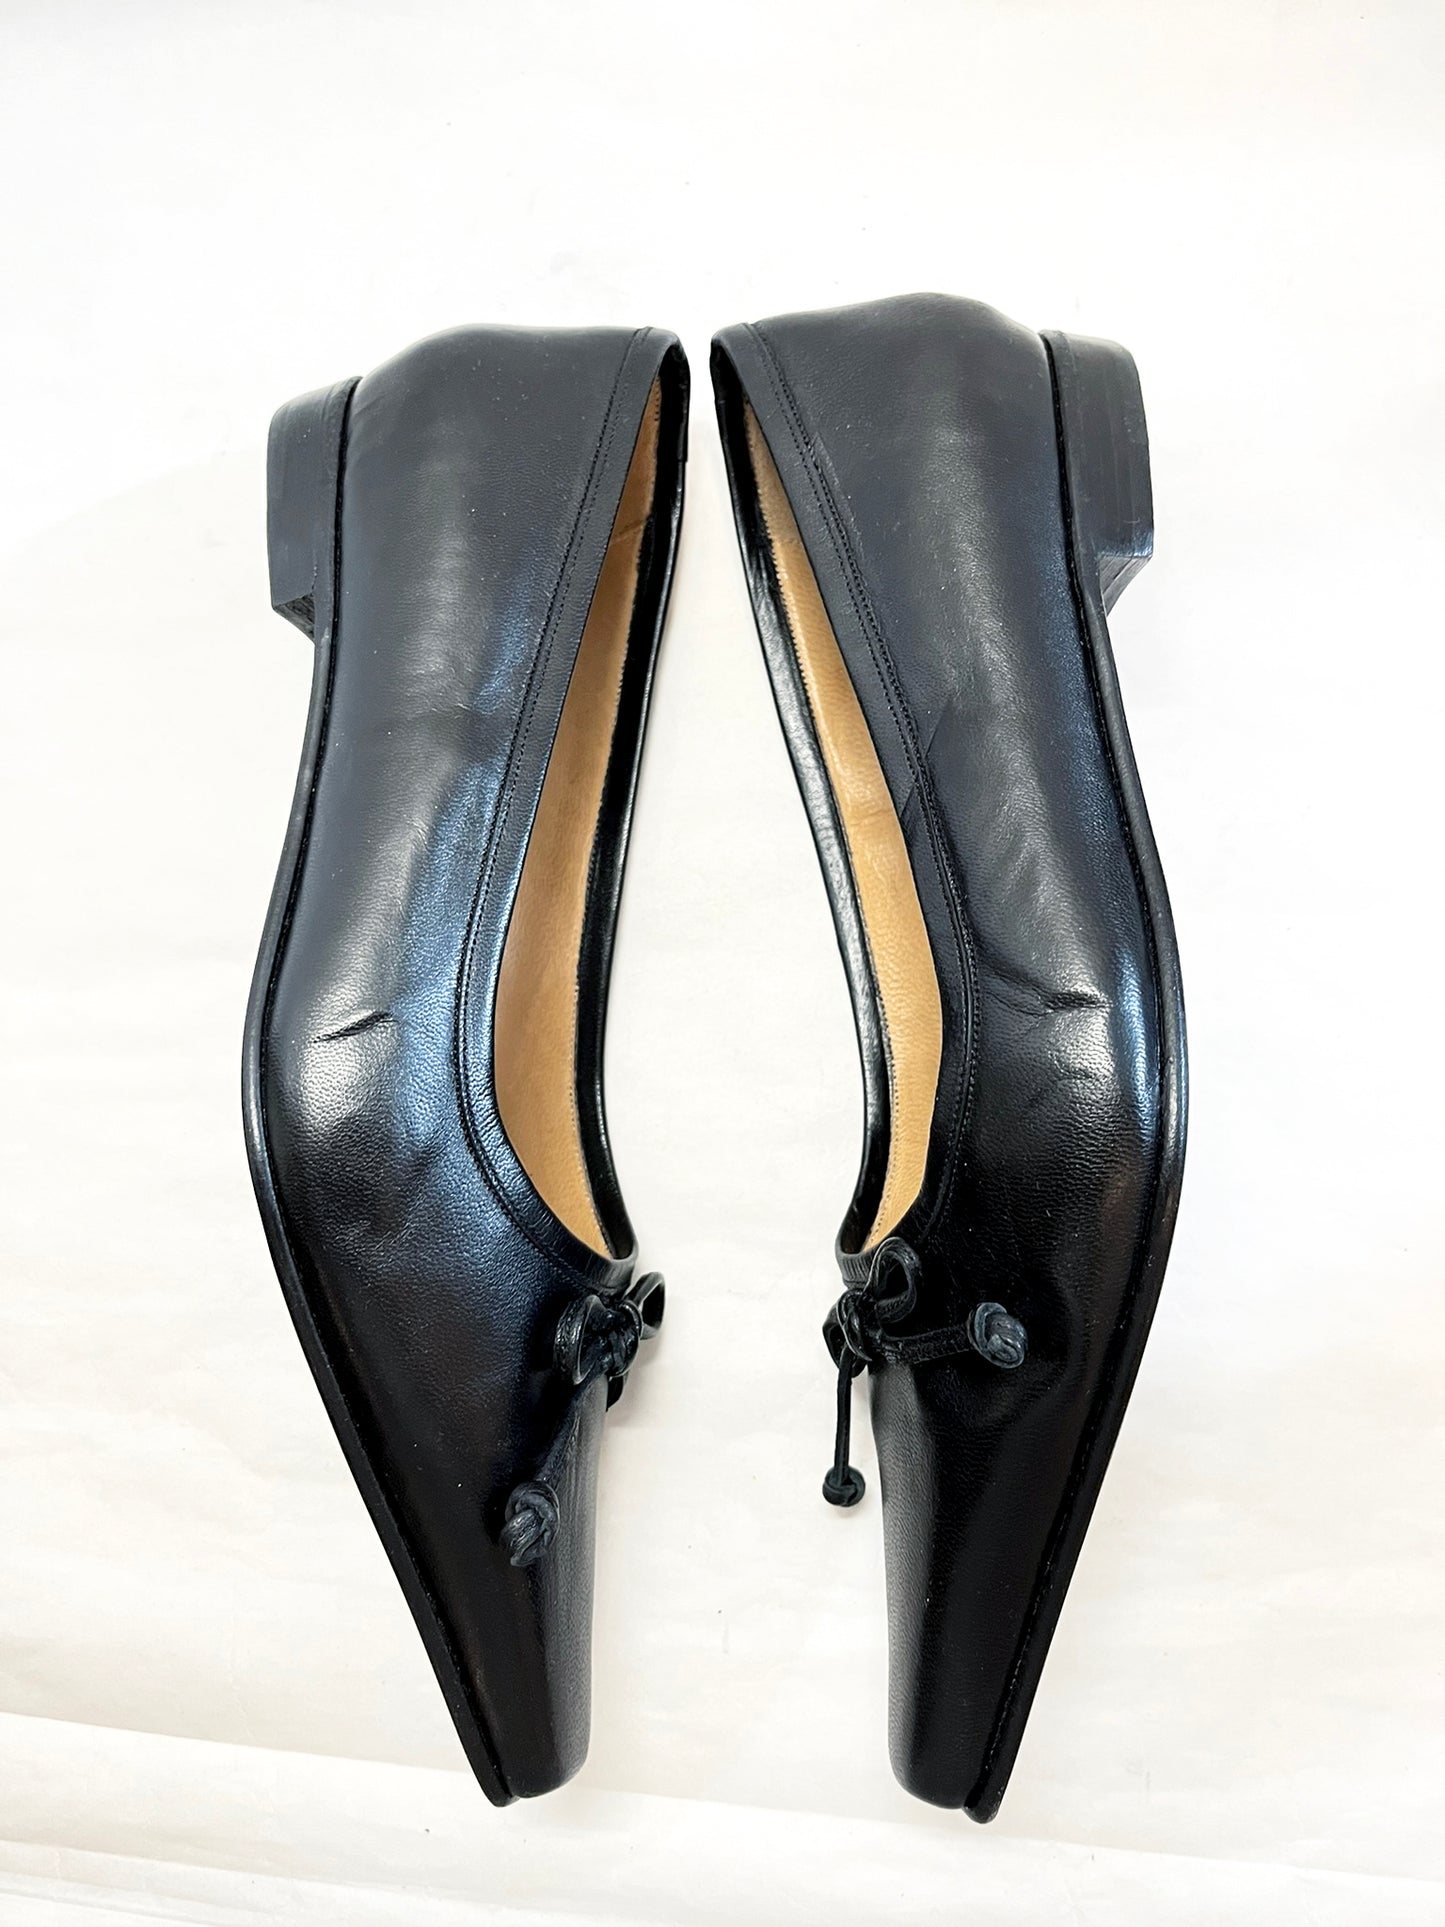 Ema Bow Flat in Black Size 39